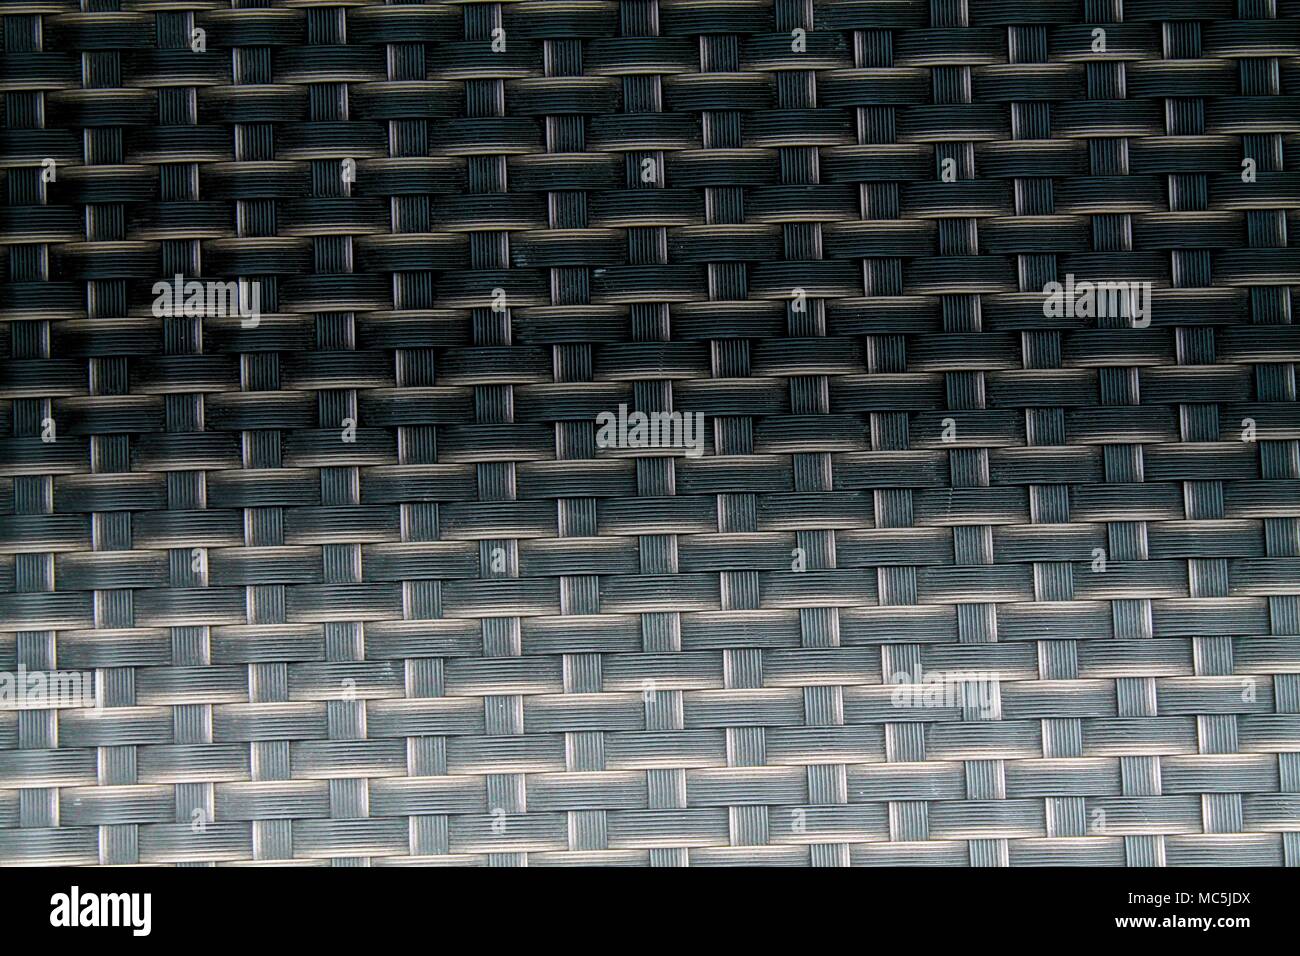 Close up image of black dash mat with grid cells Stock Photo